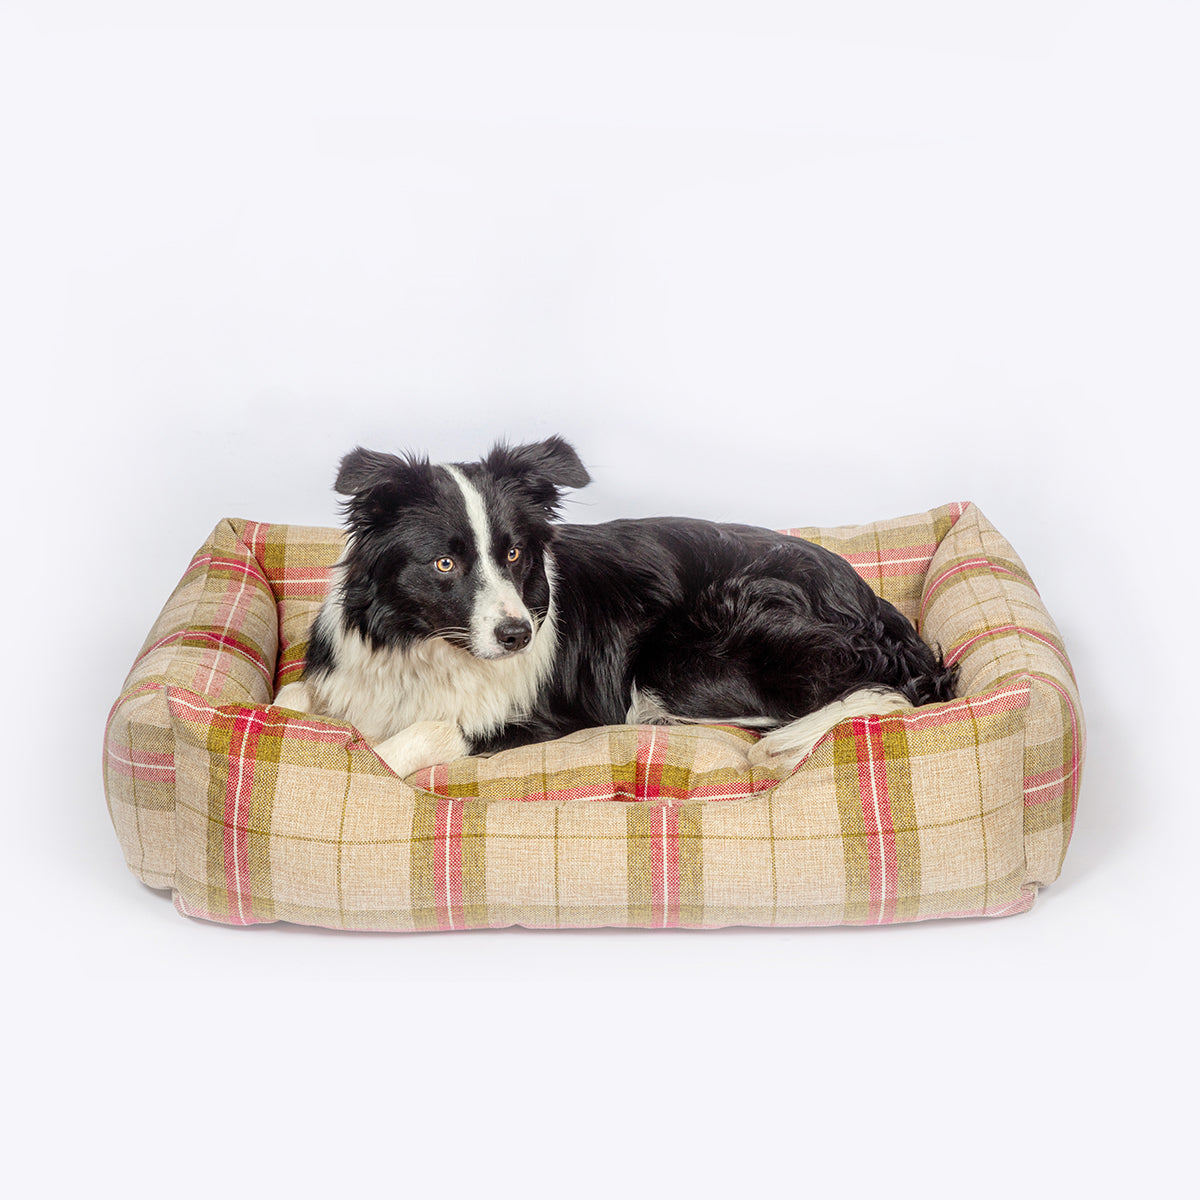 Image of Danish Design Newton Moss Snuggle Dog Bed - Brown/Red - Small 18 inches